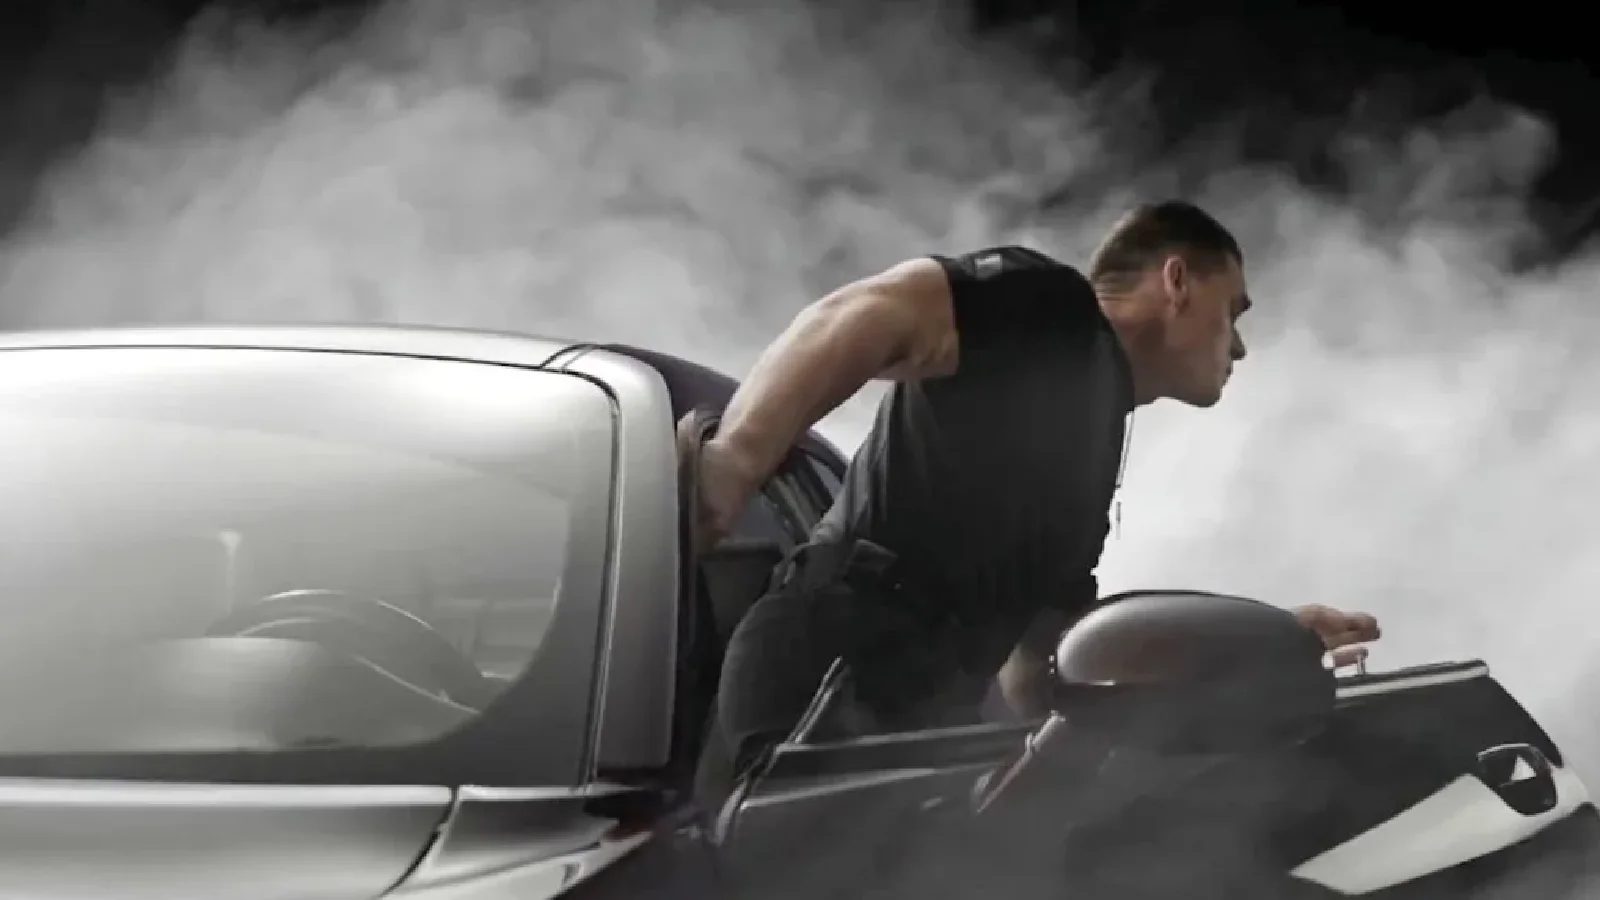 New trailer for Fast & Furious 10 reveals the return of John Cena and Jason Statham